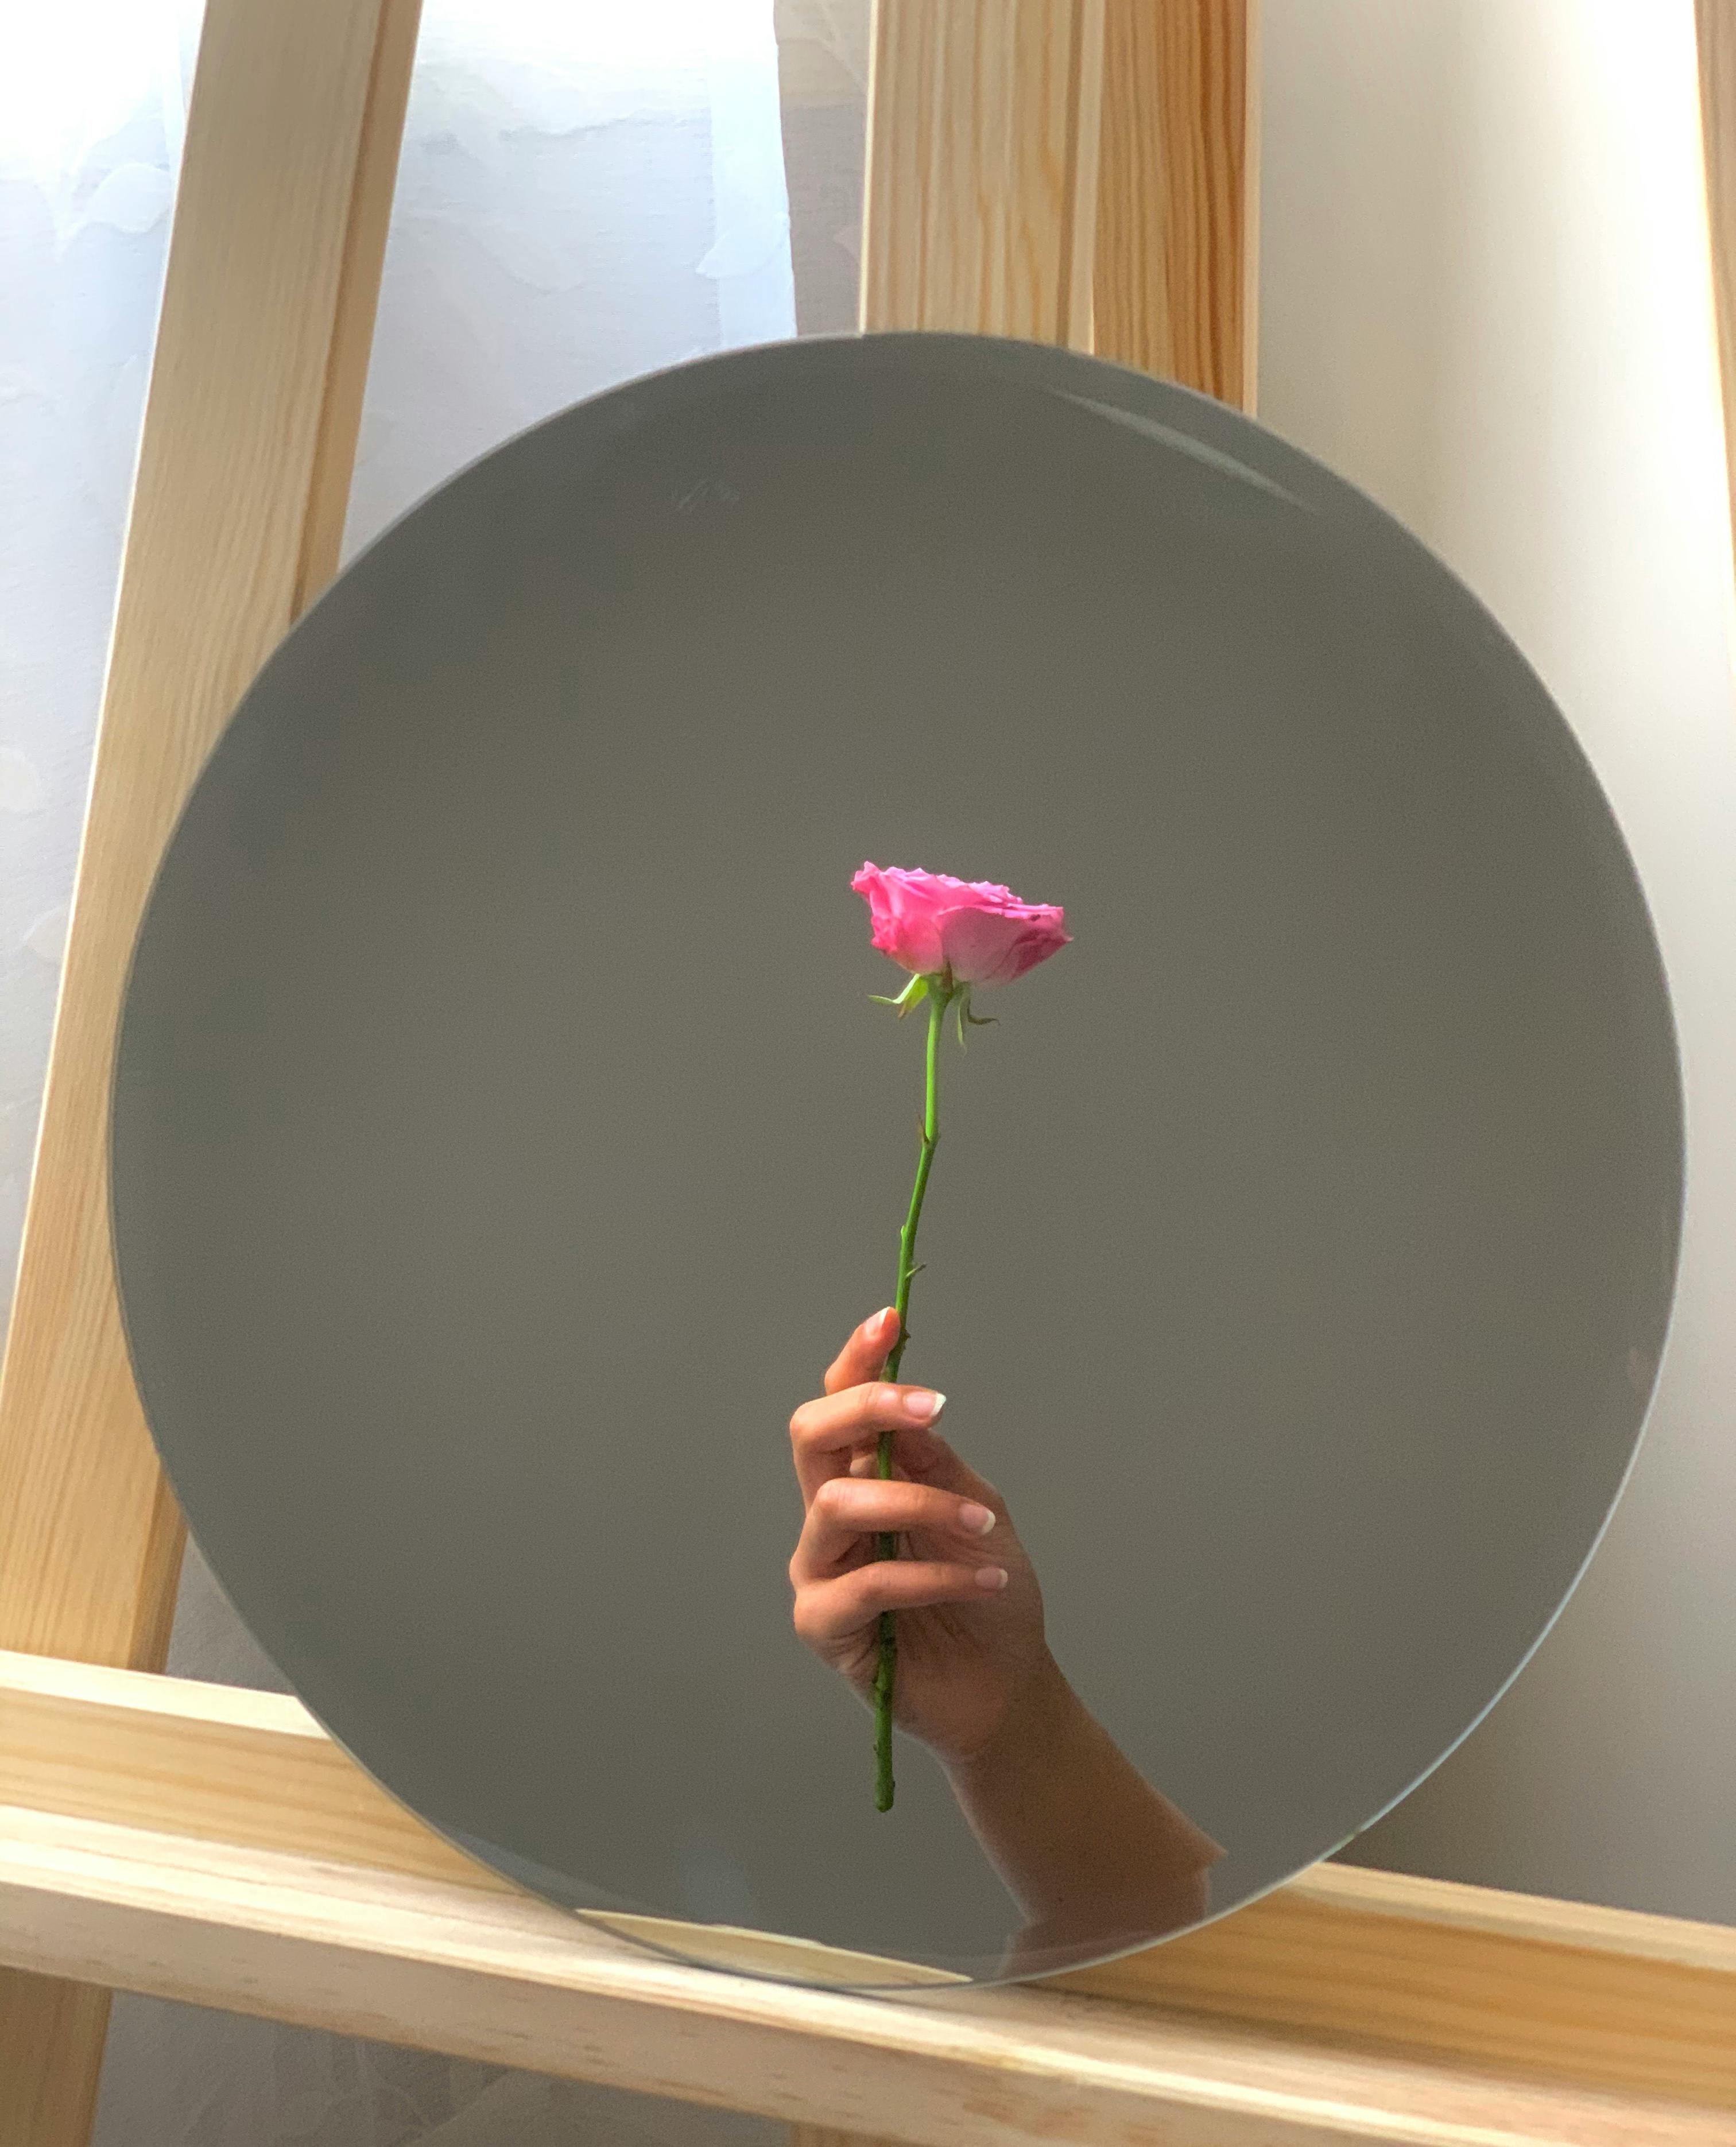 mirror reflecting tender hand with pink rose